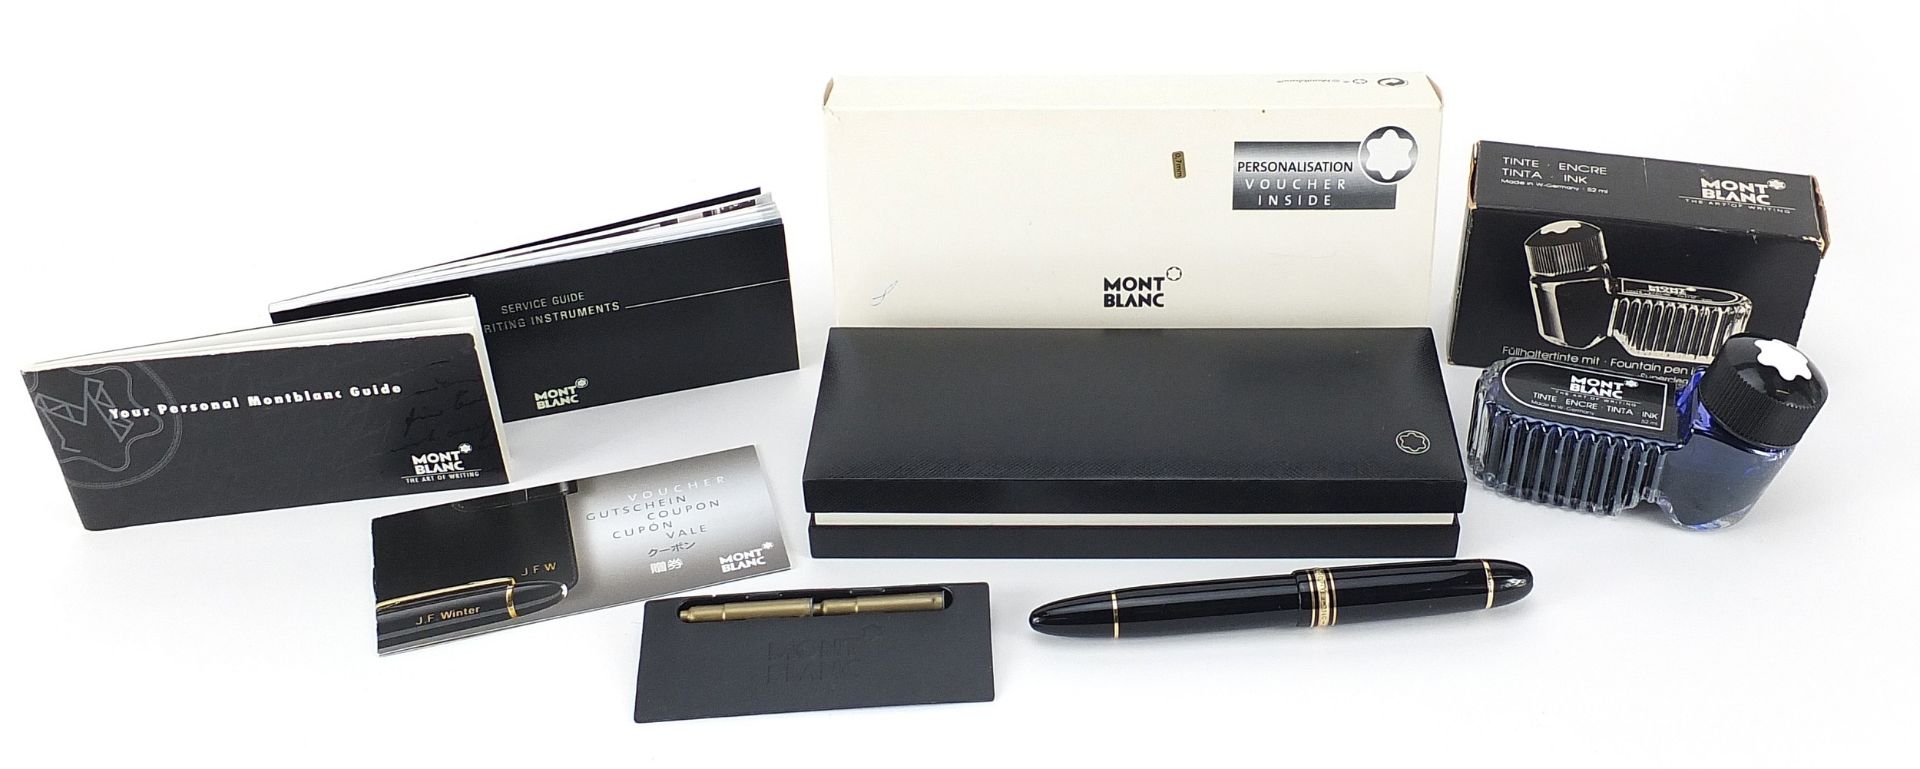 Mont Blanc Meisterstuck no 149 fountain pen and 14k gold nib and accessories including case and ink - Image 2 of 6